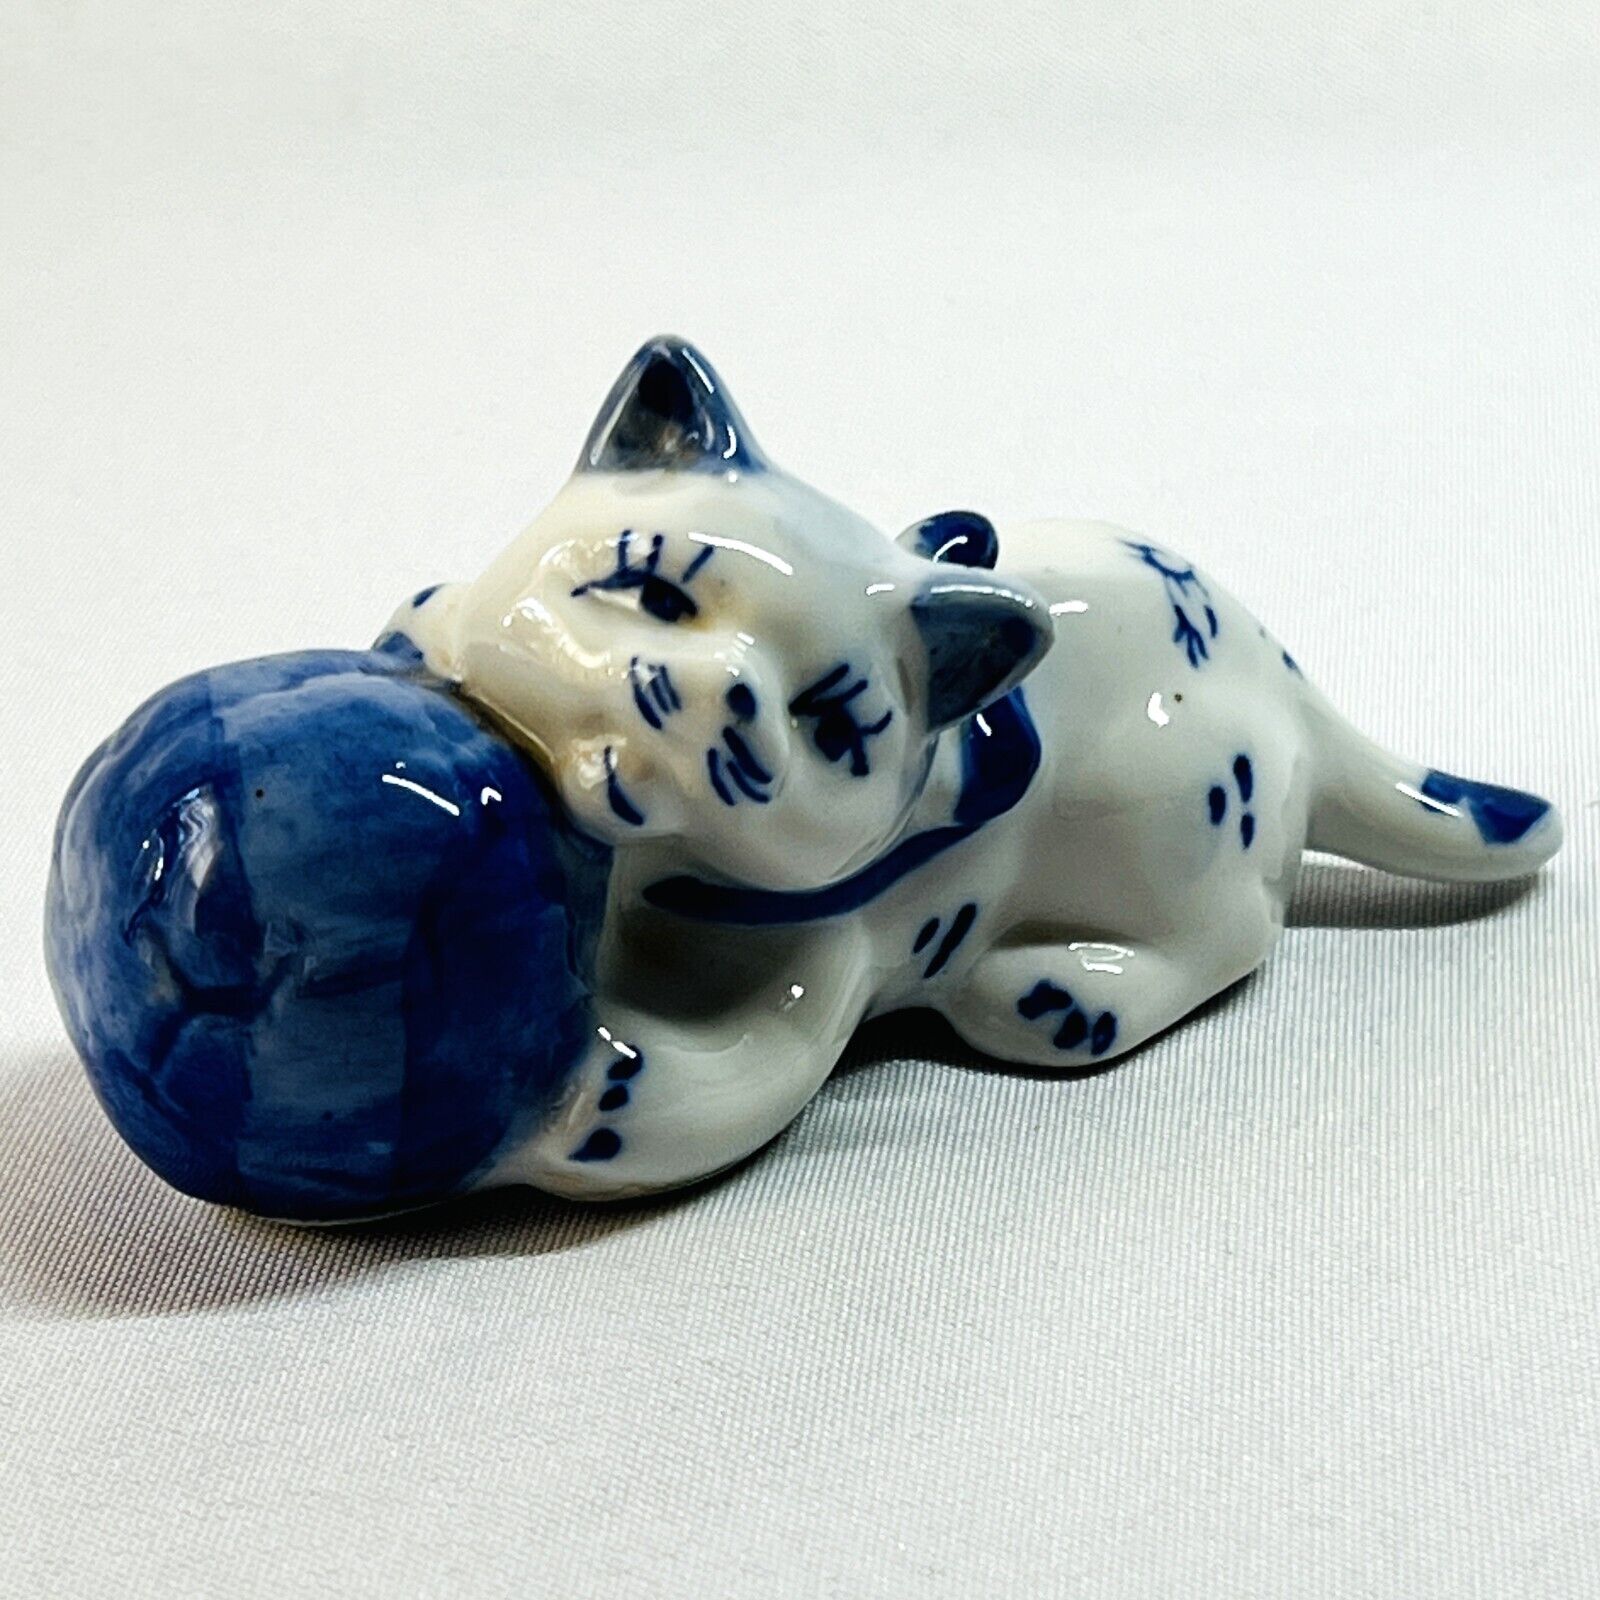 Vintage Asian Blue White Playful Kitty with Yarn Ball Porcelain Figurine